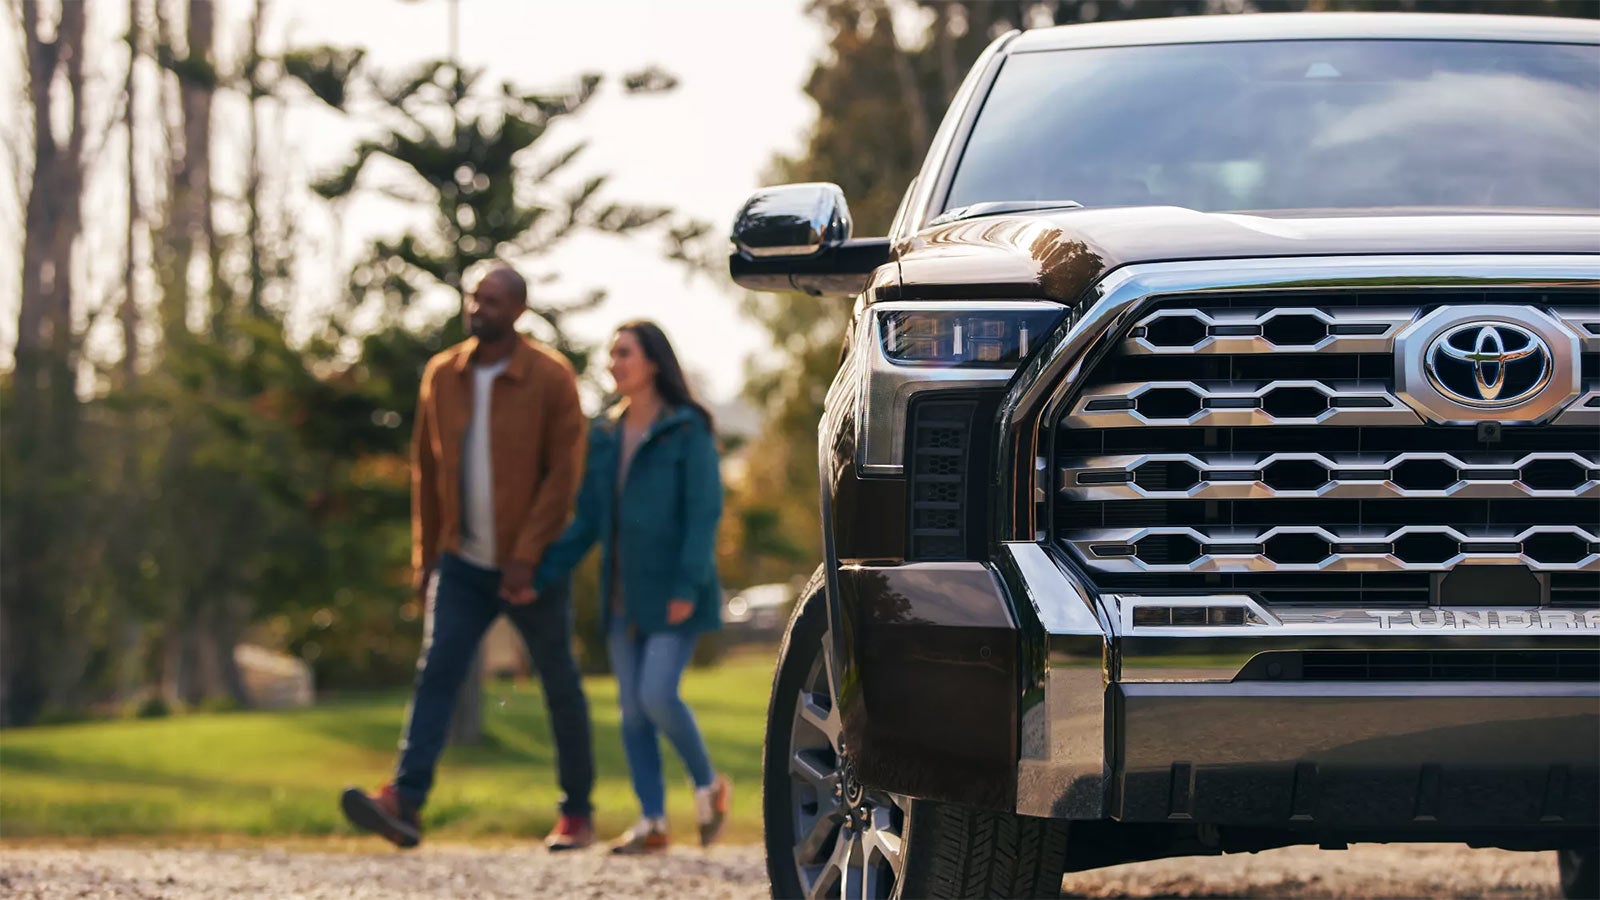 2022 Toyota Tundra Gallery | Toyota of Kent in Kent OH